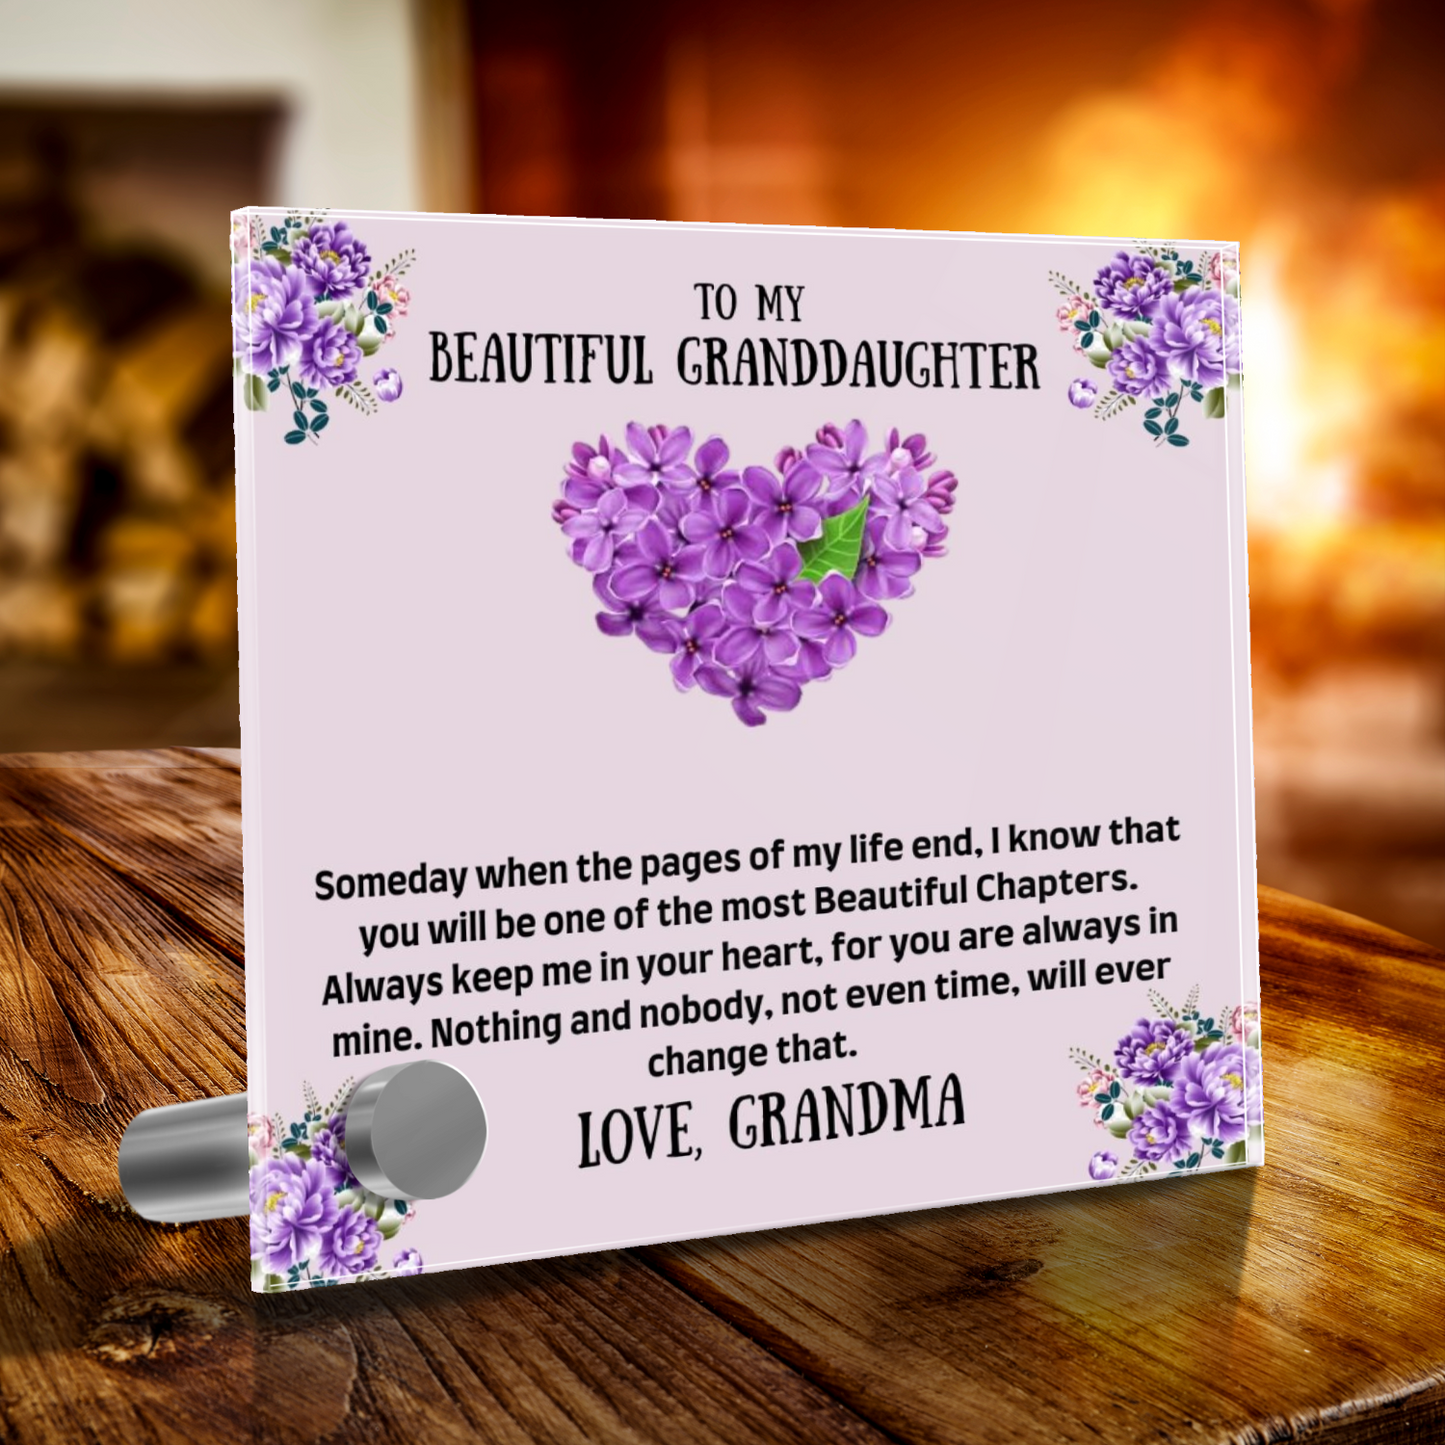 To My Granddaughter - Lumen Glass Message Display Stand with Necklace, Gifts for Granddaughters, Granddaughter Necklace, For Granddaughters